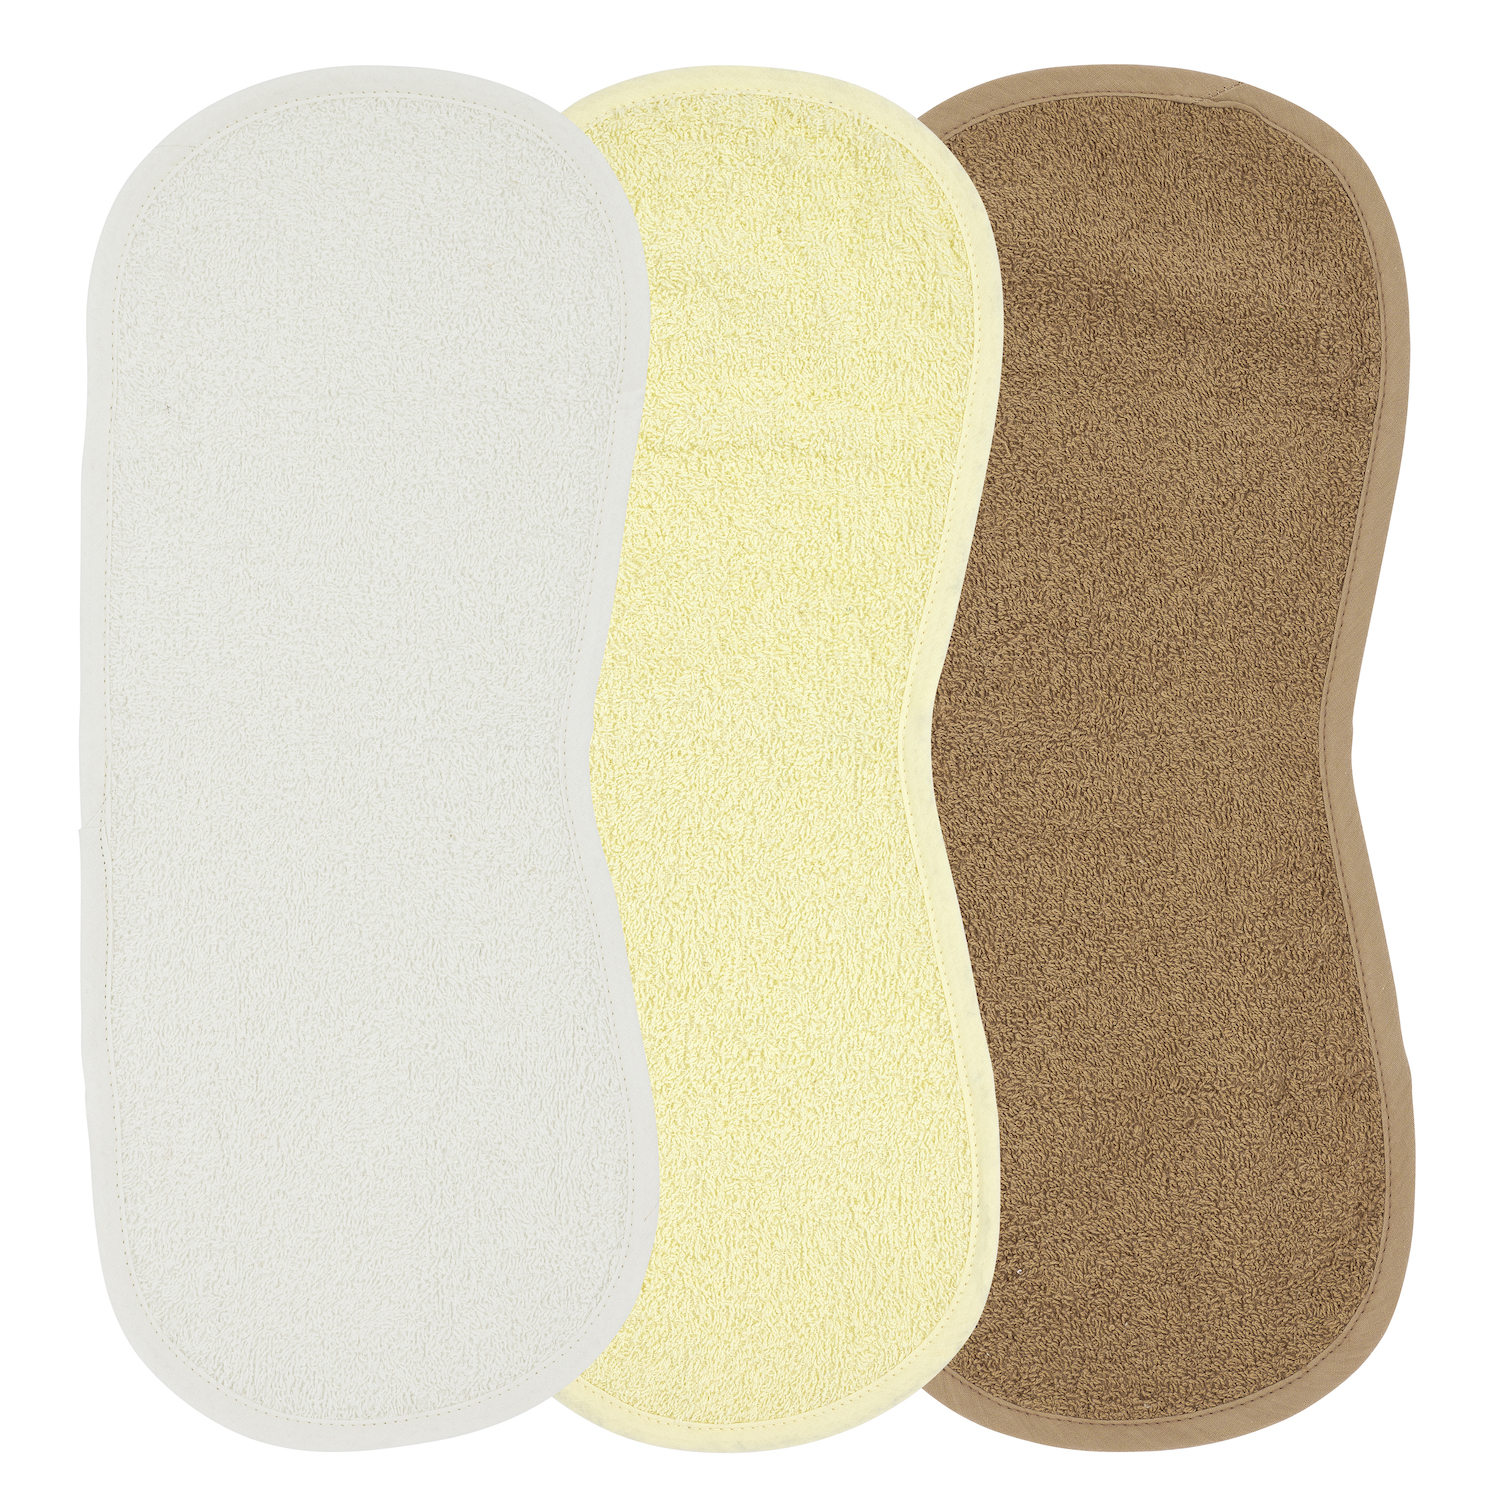 Burb cloth 3-pack terry Uni - offwhite/soft yellow/toffee - 53x20cm